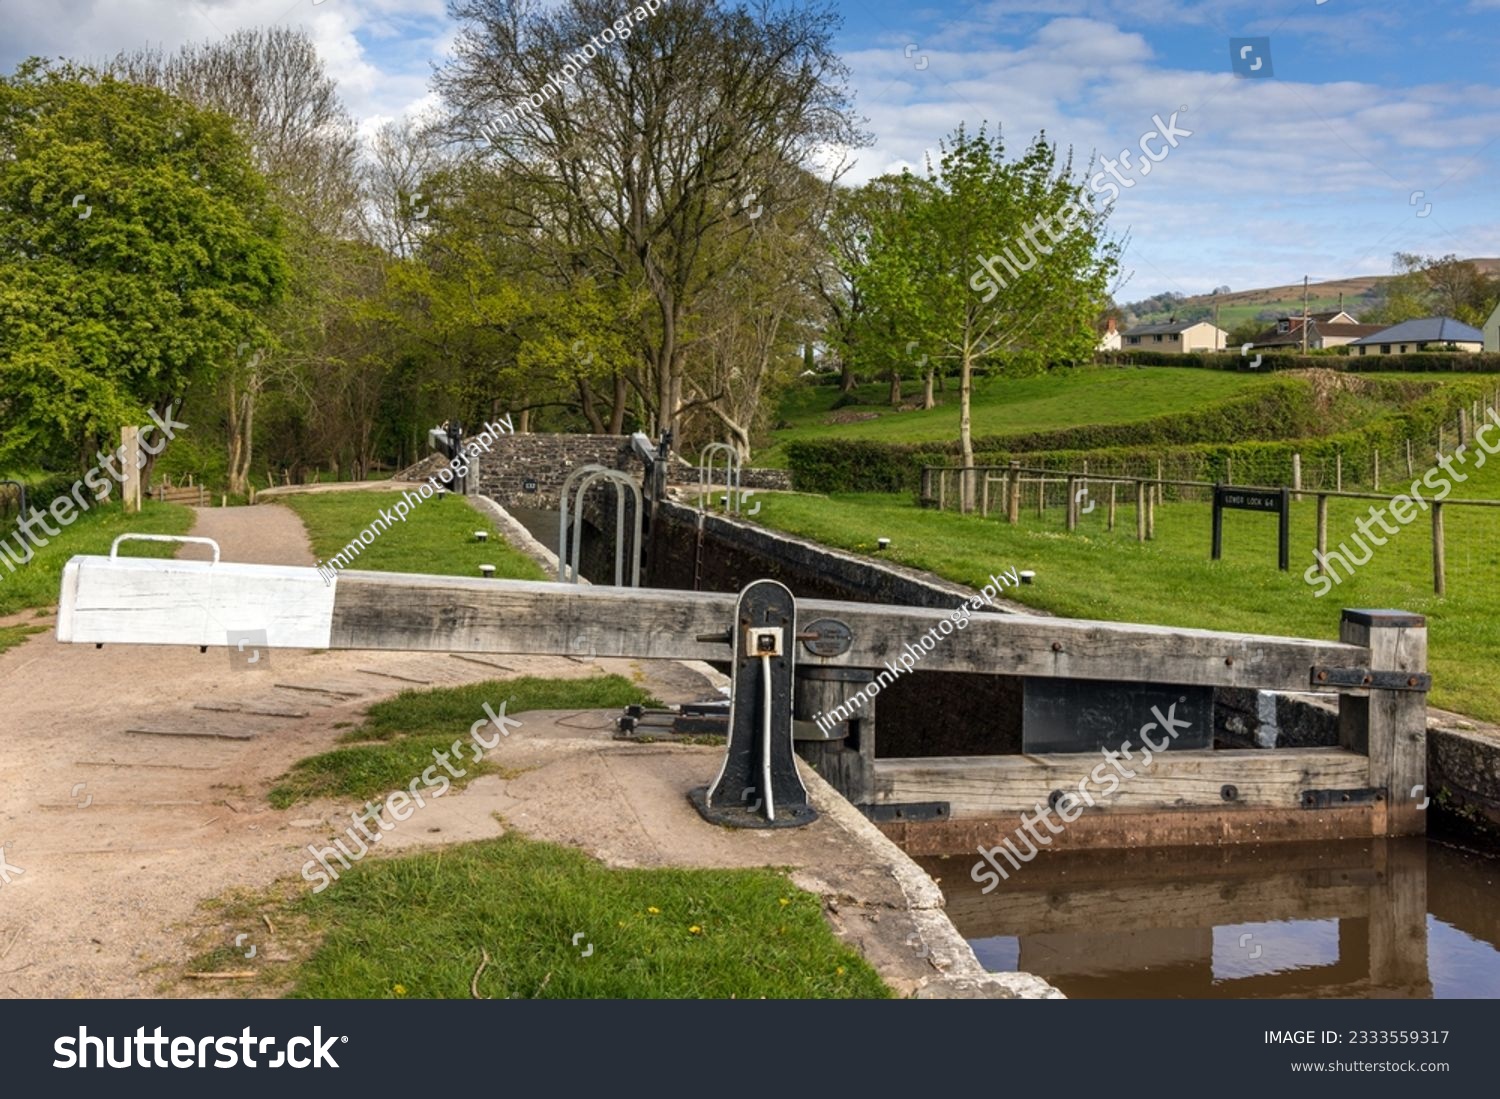 Lower Llangynidr Locks and Bridge 132 on the Monmouthshire and Brecon Canal in the Brecon Beacons National Park. #2333559317